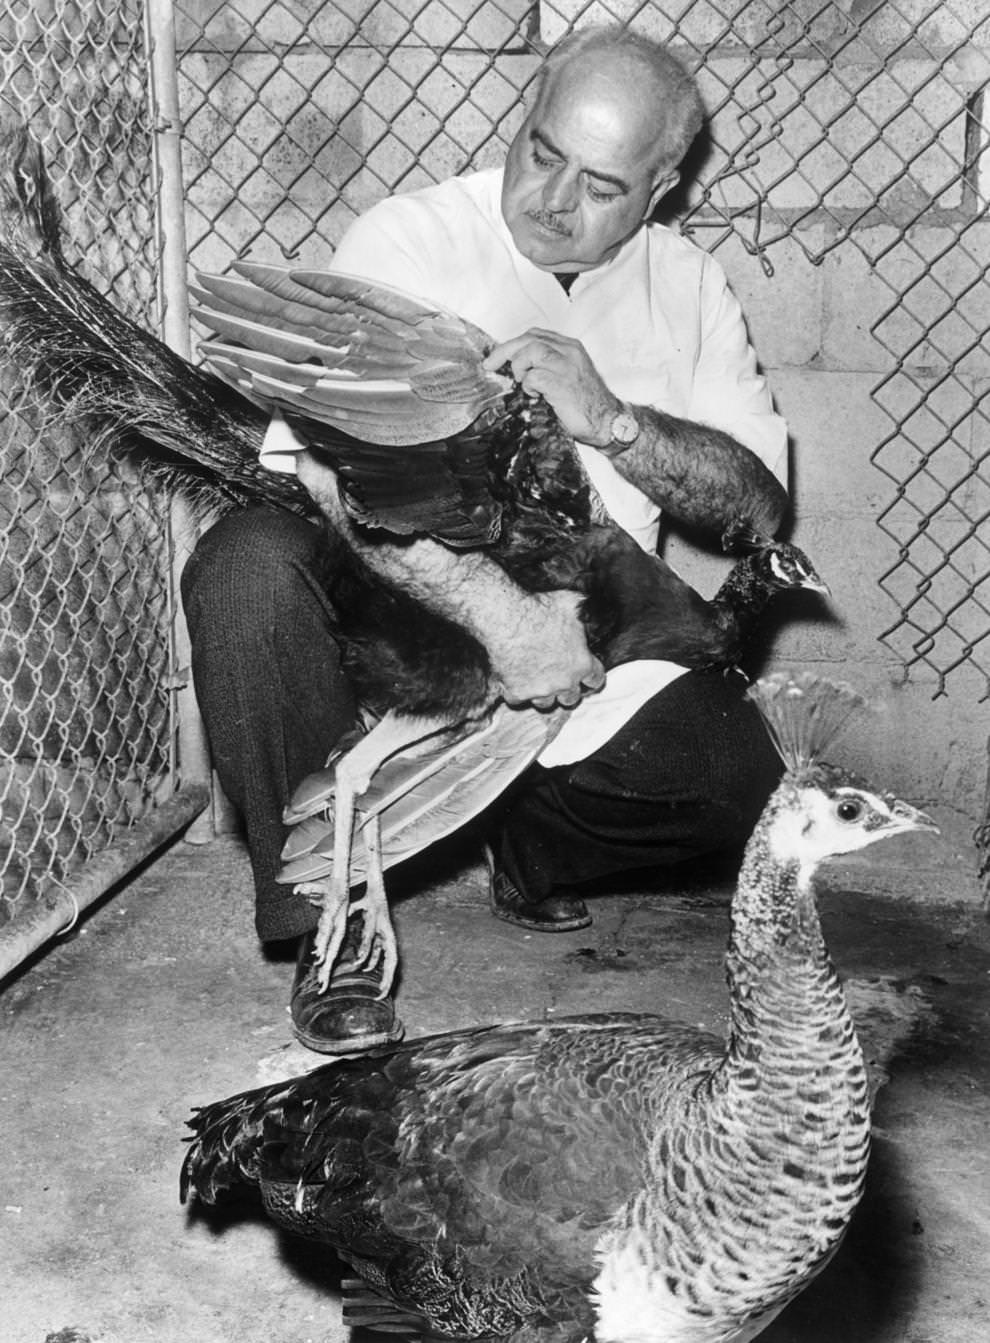 Richmond city veterinarian Dr. Robert Barton performed checkups on a peacock and peahen that were being presented as gifts to the city by the Indian Embassy, 1964.